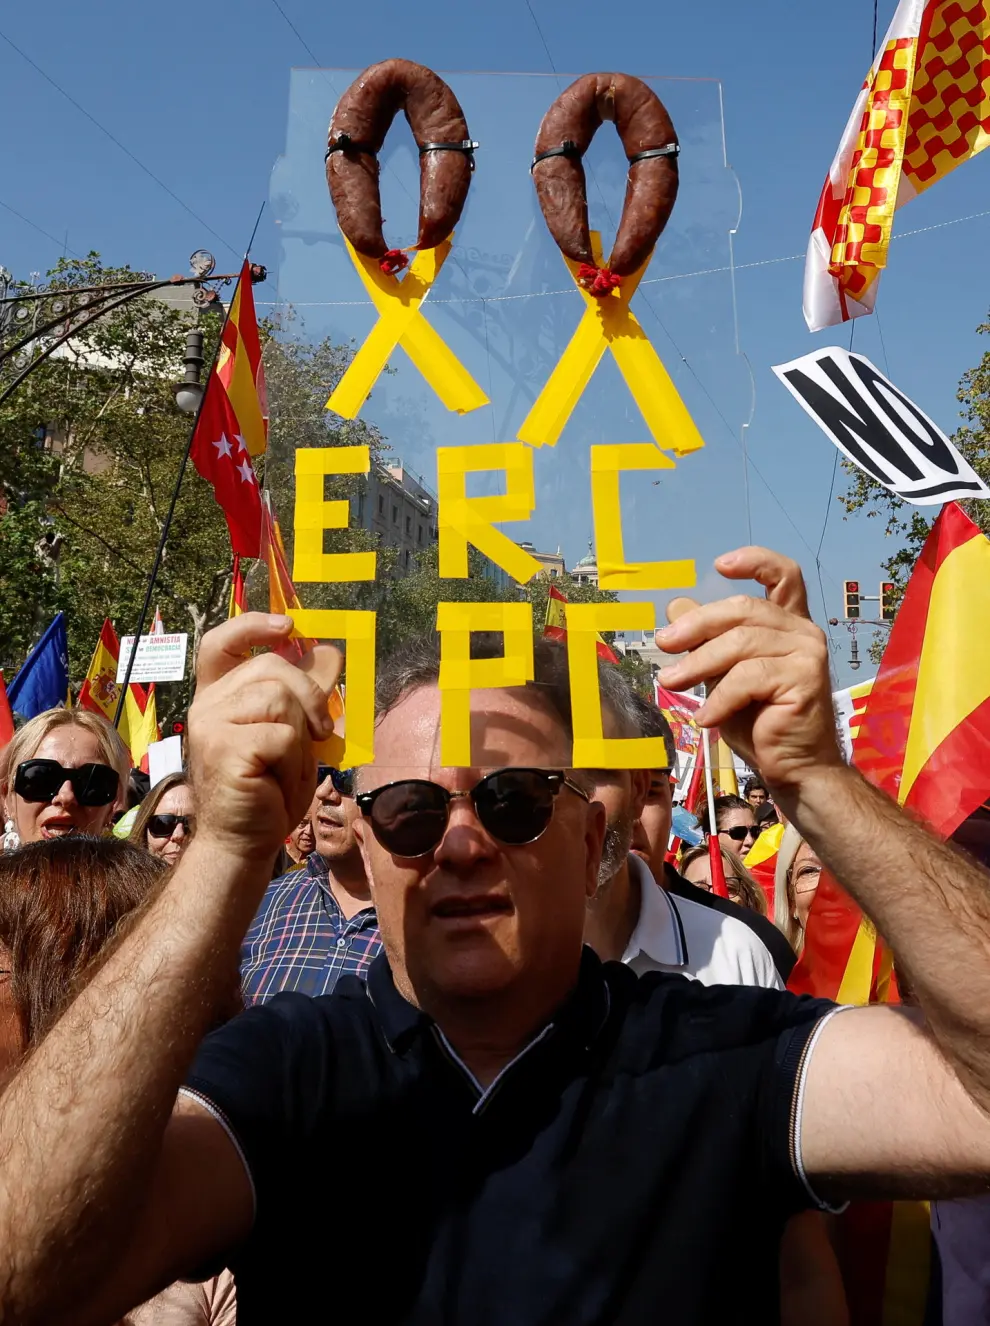 Unionist supporters protest against amnesty of separatist leaders and activists involved in the 2017 failed independence drive at Passeig de Gracia in Barcelona, Spain, October 8, 2023. The banner reads "ERC (Esquerra Republicana Catalunya) and JPC (Junts Per Catalunya) parties", with a couple of chorizos forming a ribbon. REUTERS/ Albert Gea